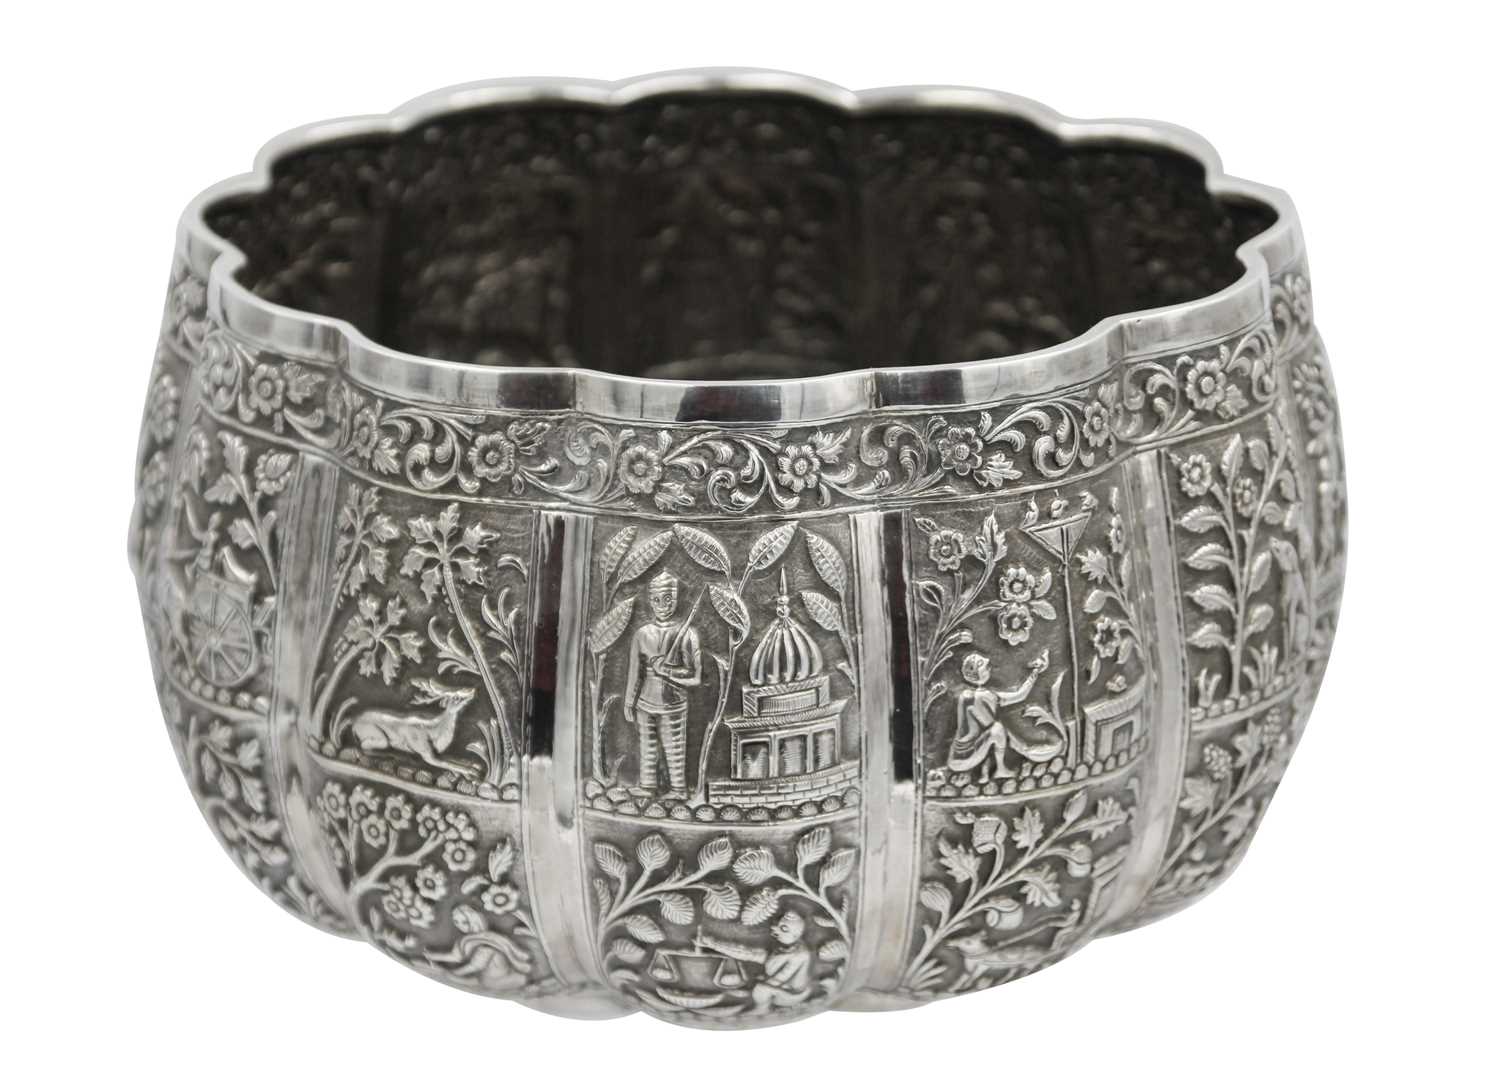 A Burmese silver thabeik lobed bowl, early 20th century. - Image 2 of 6